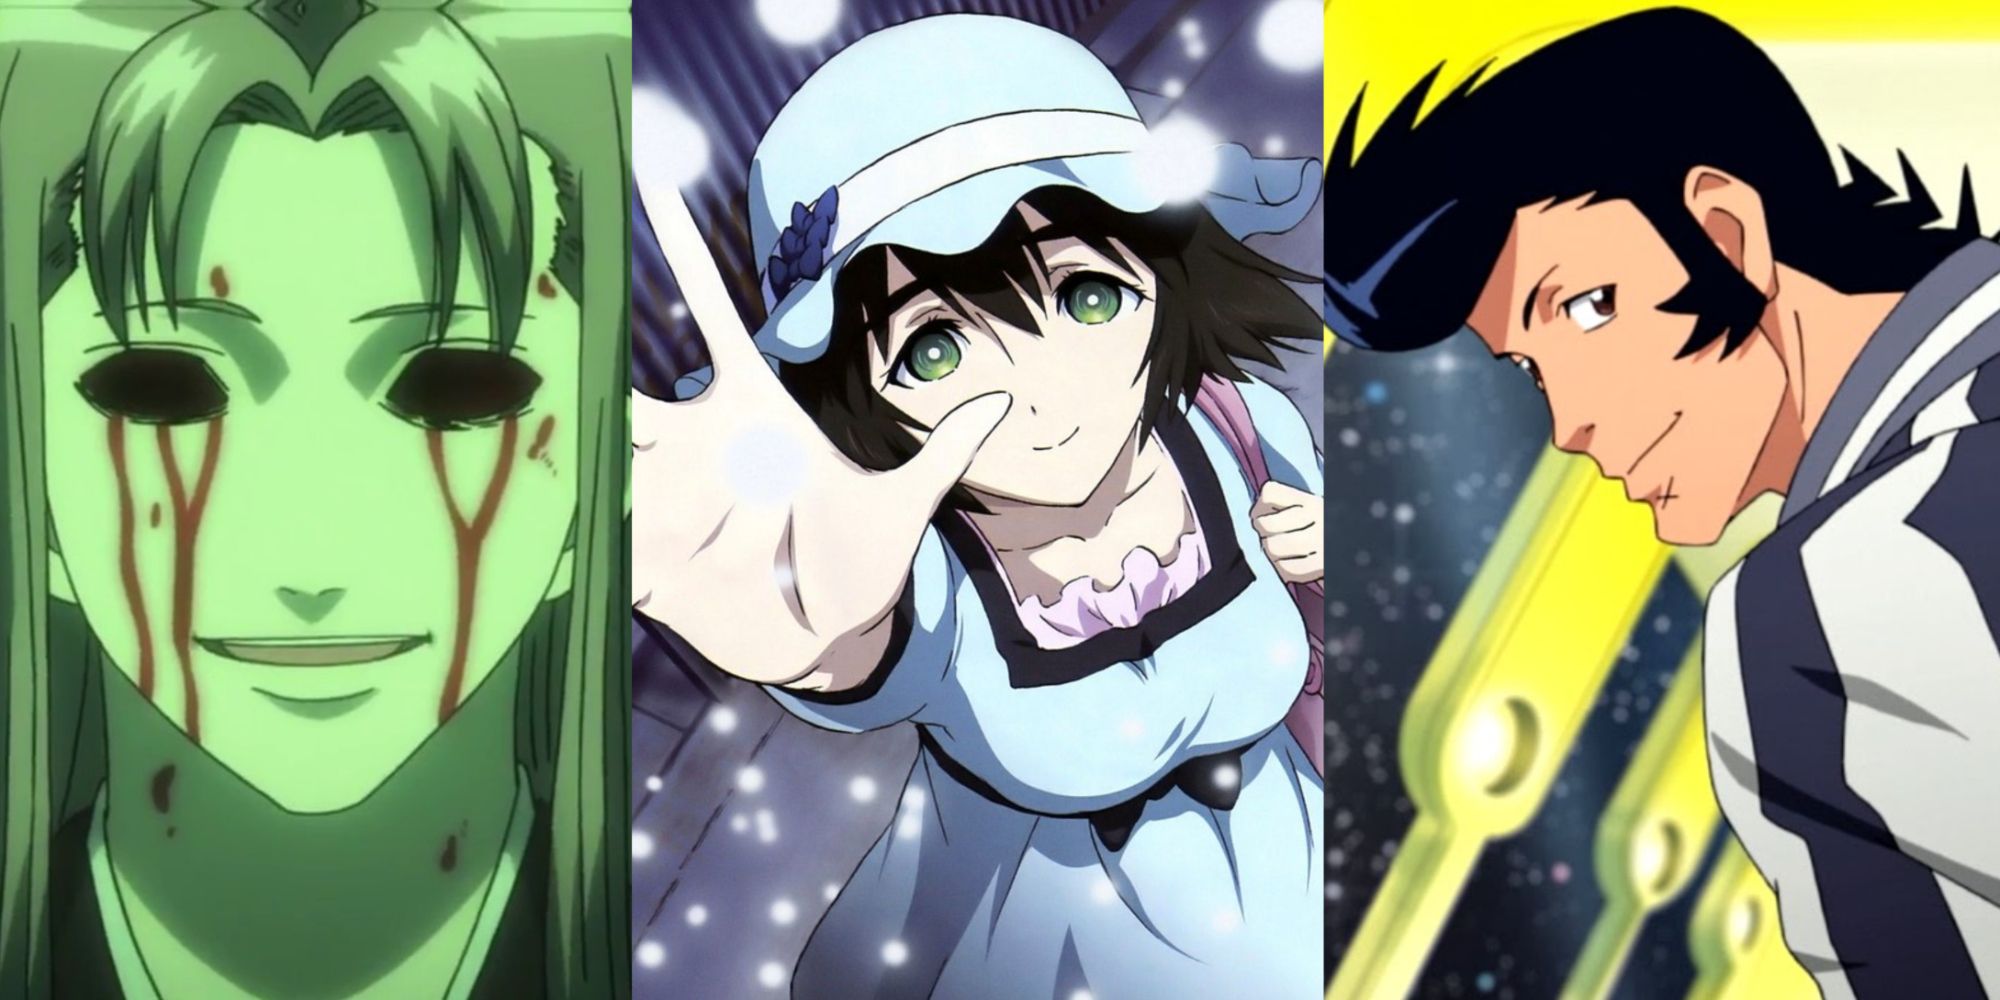 10 Anime Characters Who Faked Their Deaths (& Why)